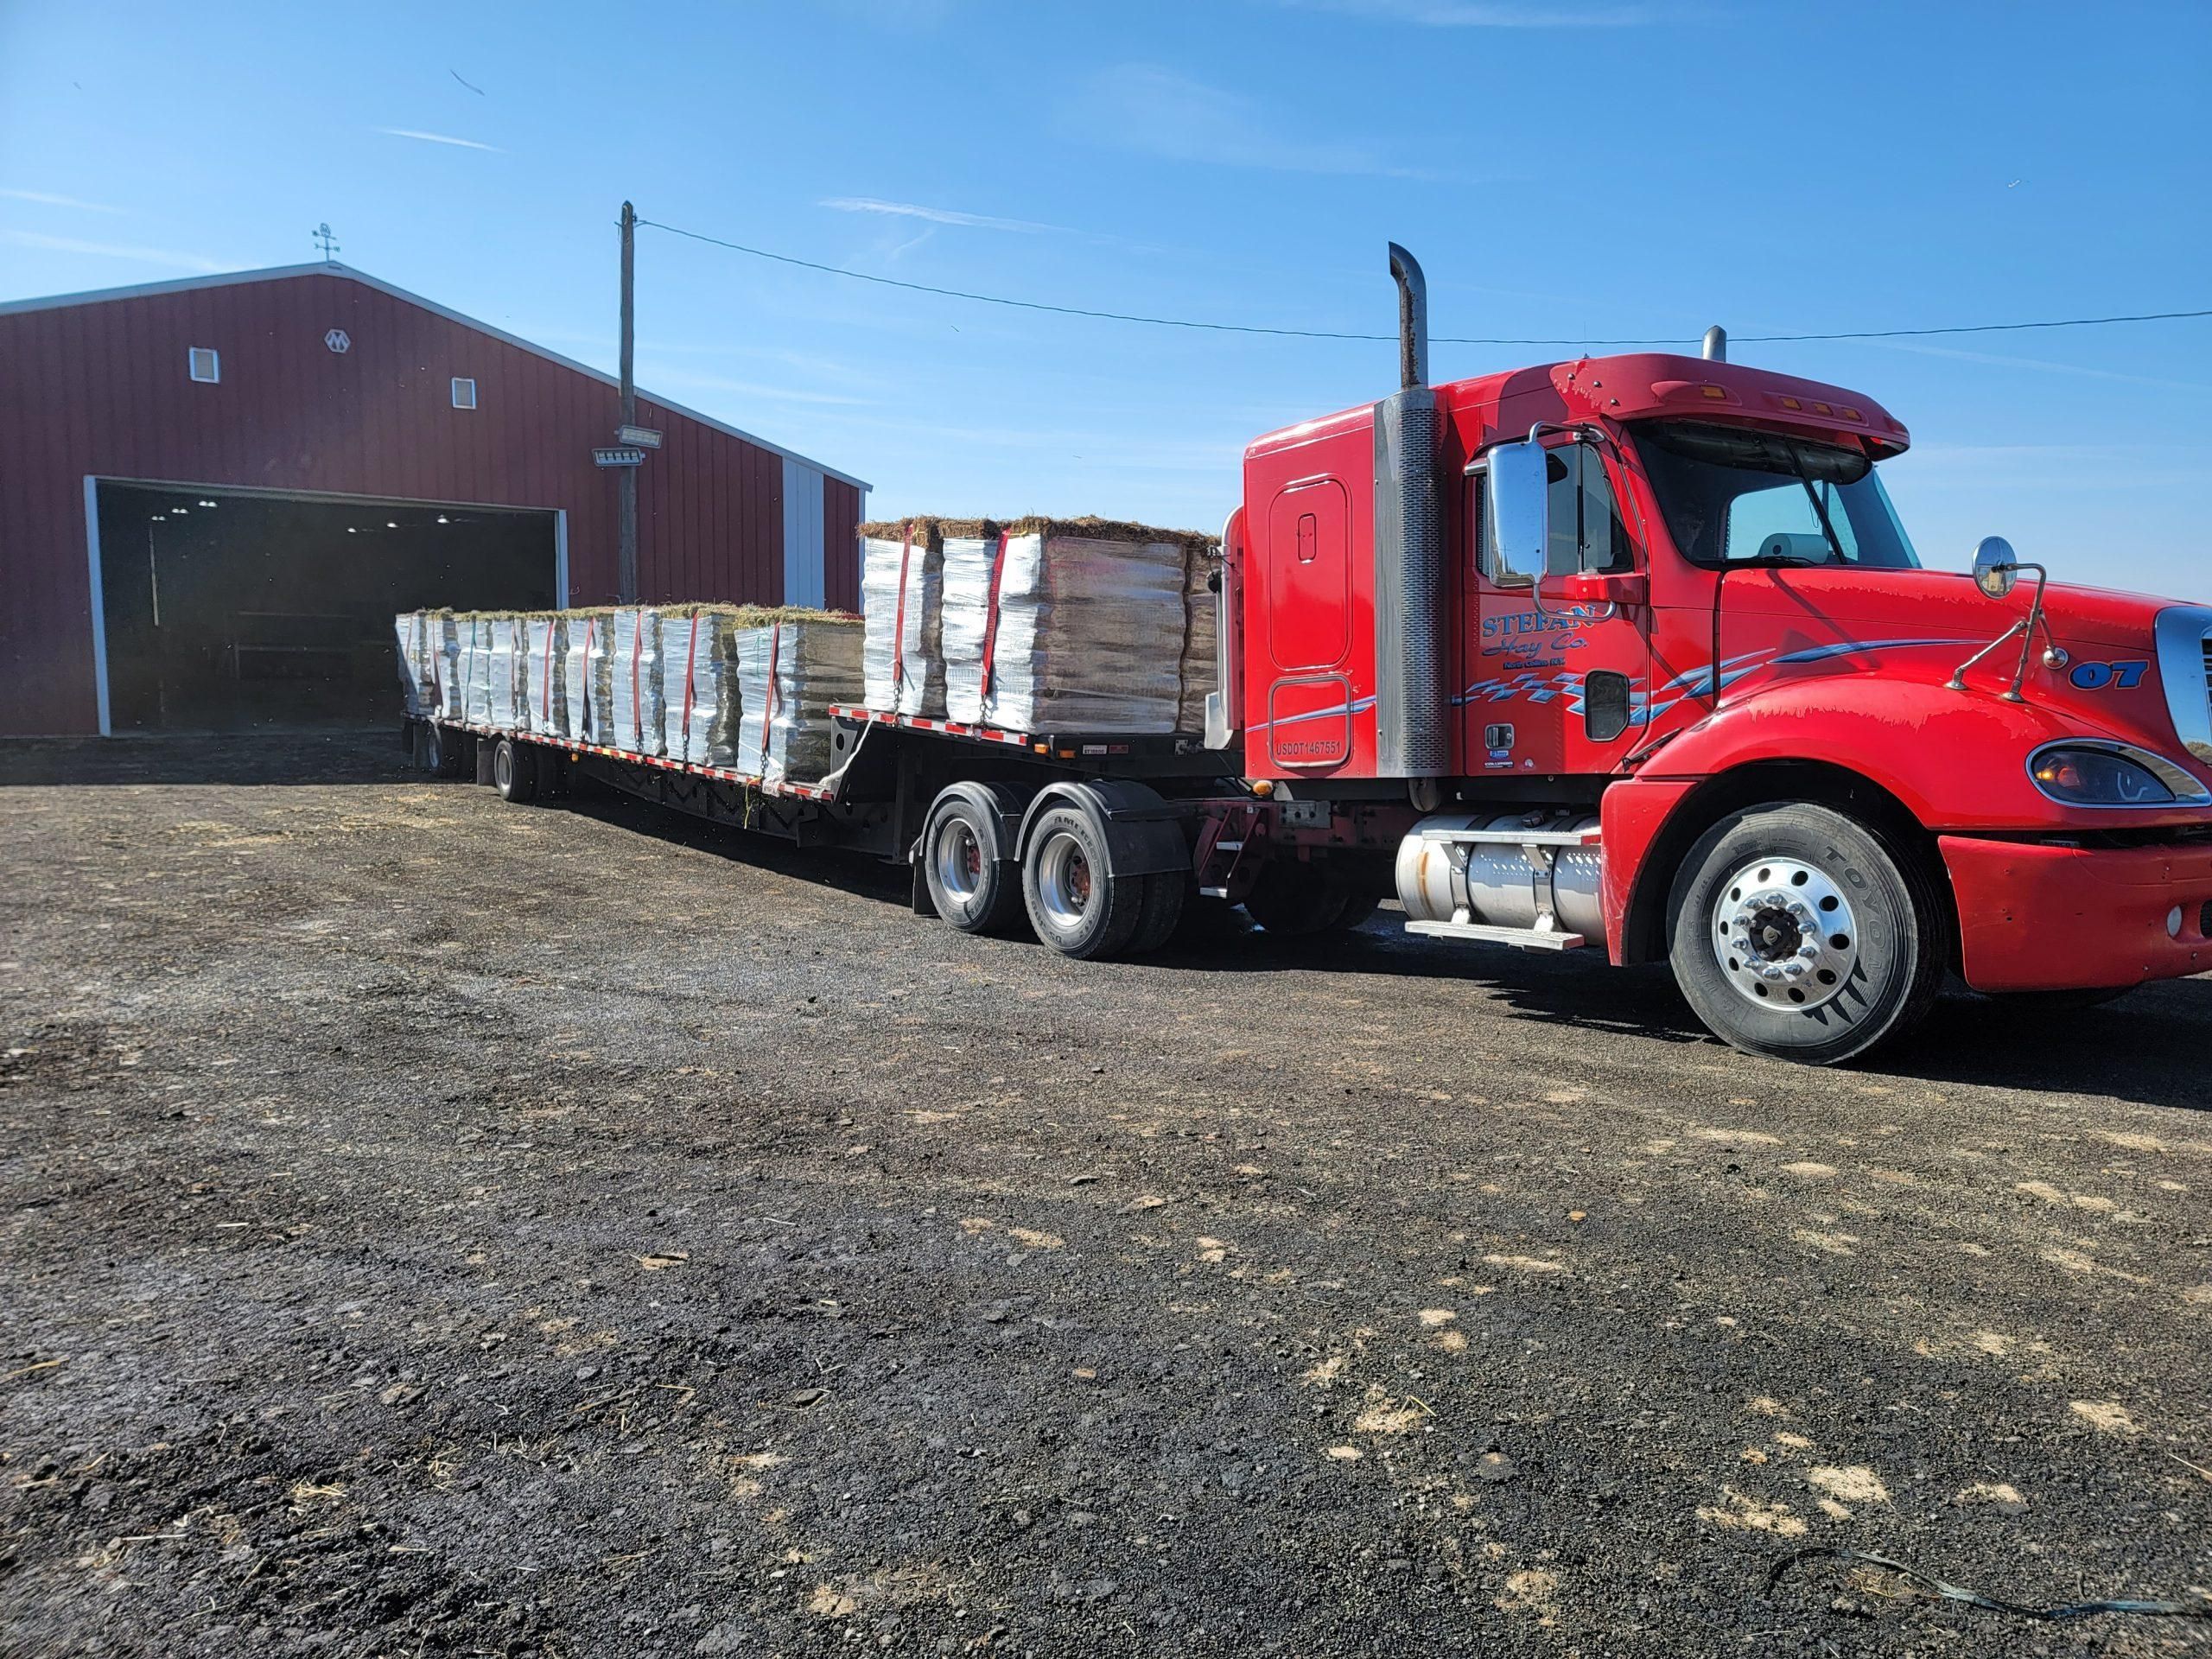 Stefan Hay co truck ready for delivery, loaded hay bales